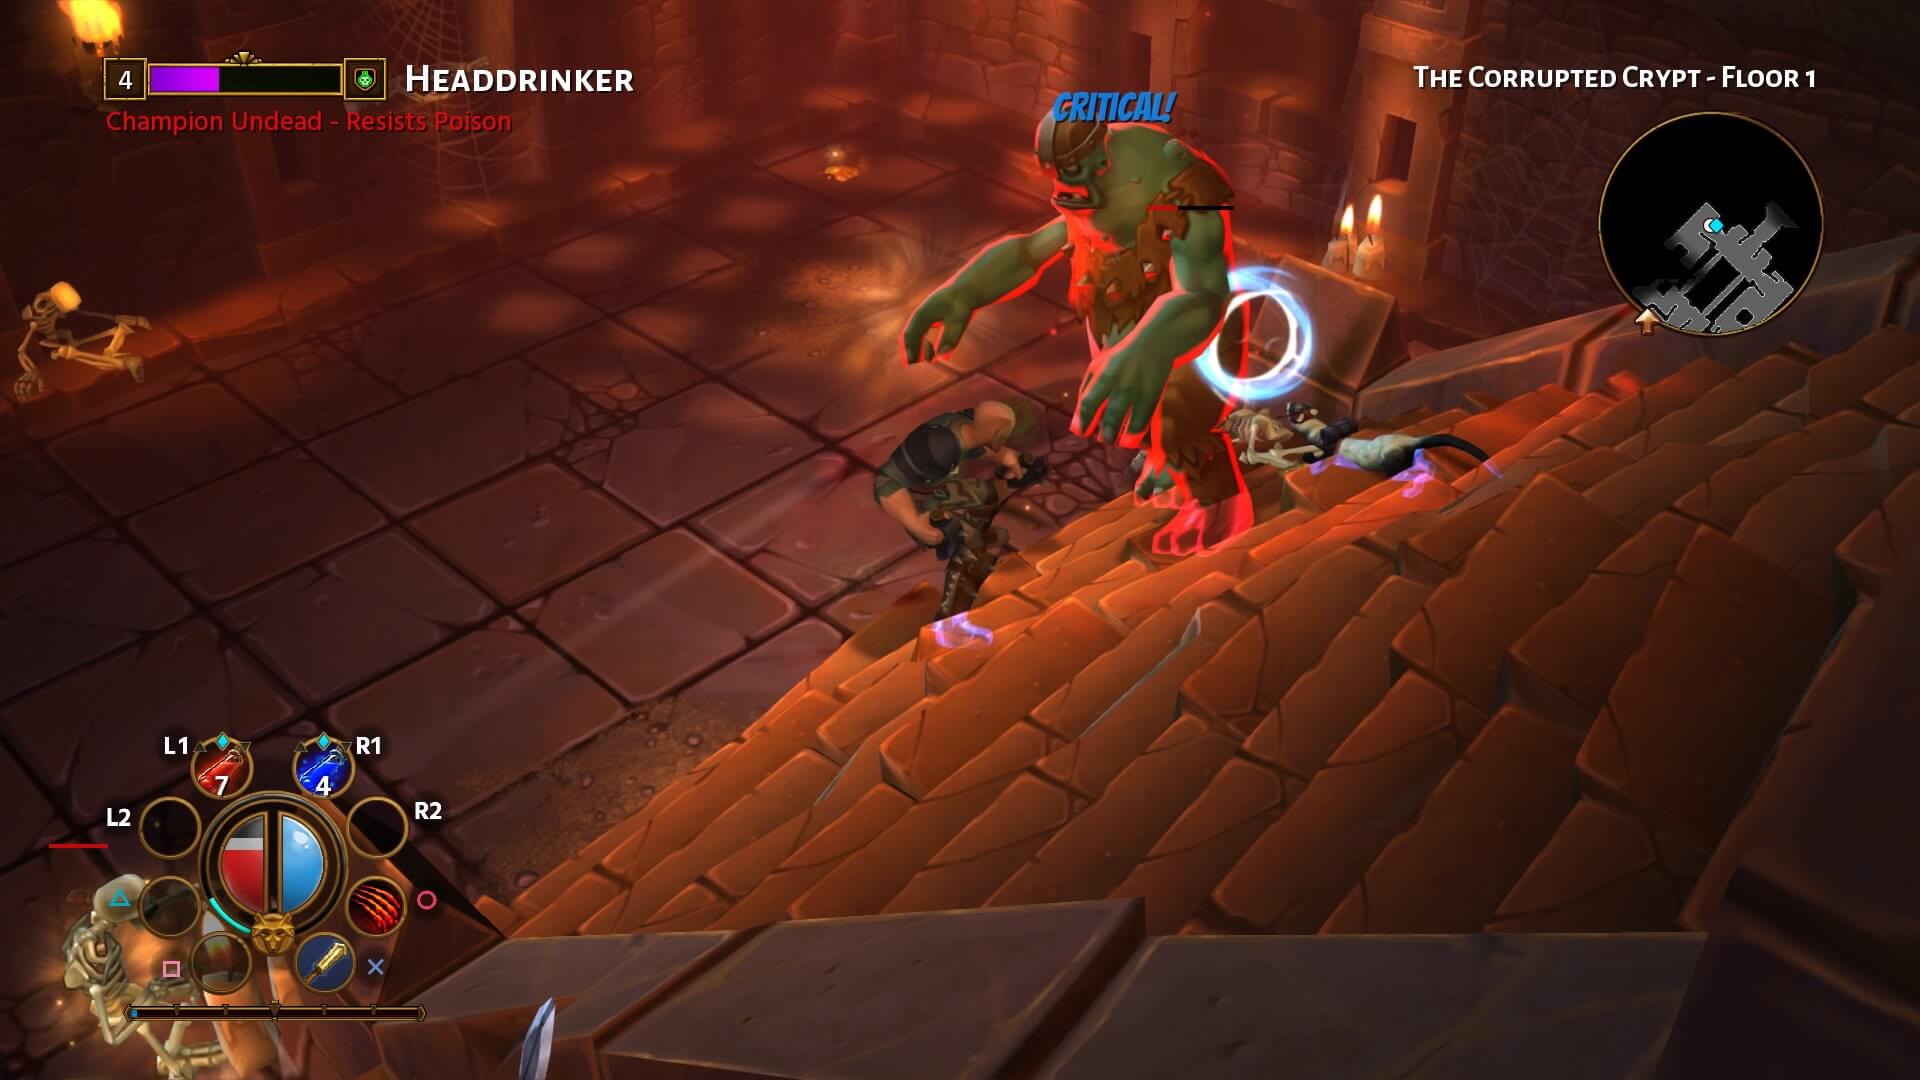 Earning fame in Torchlight 2; defeating above average enemies